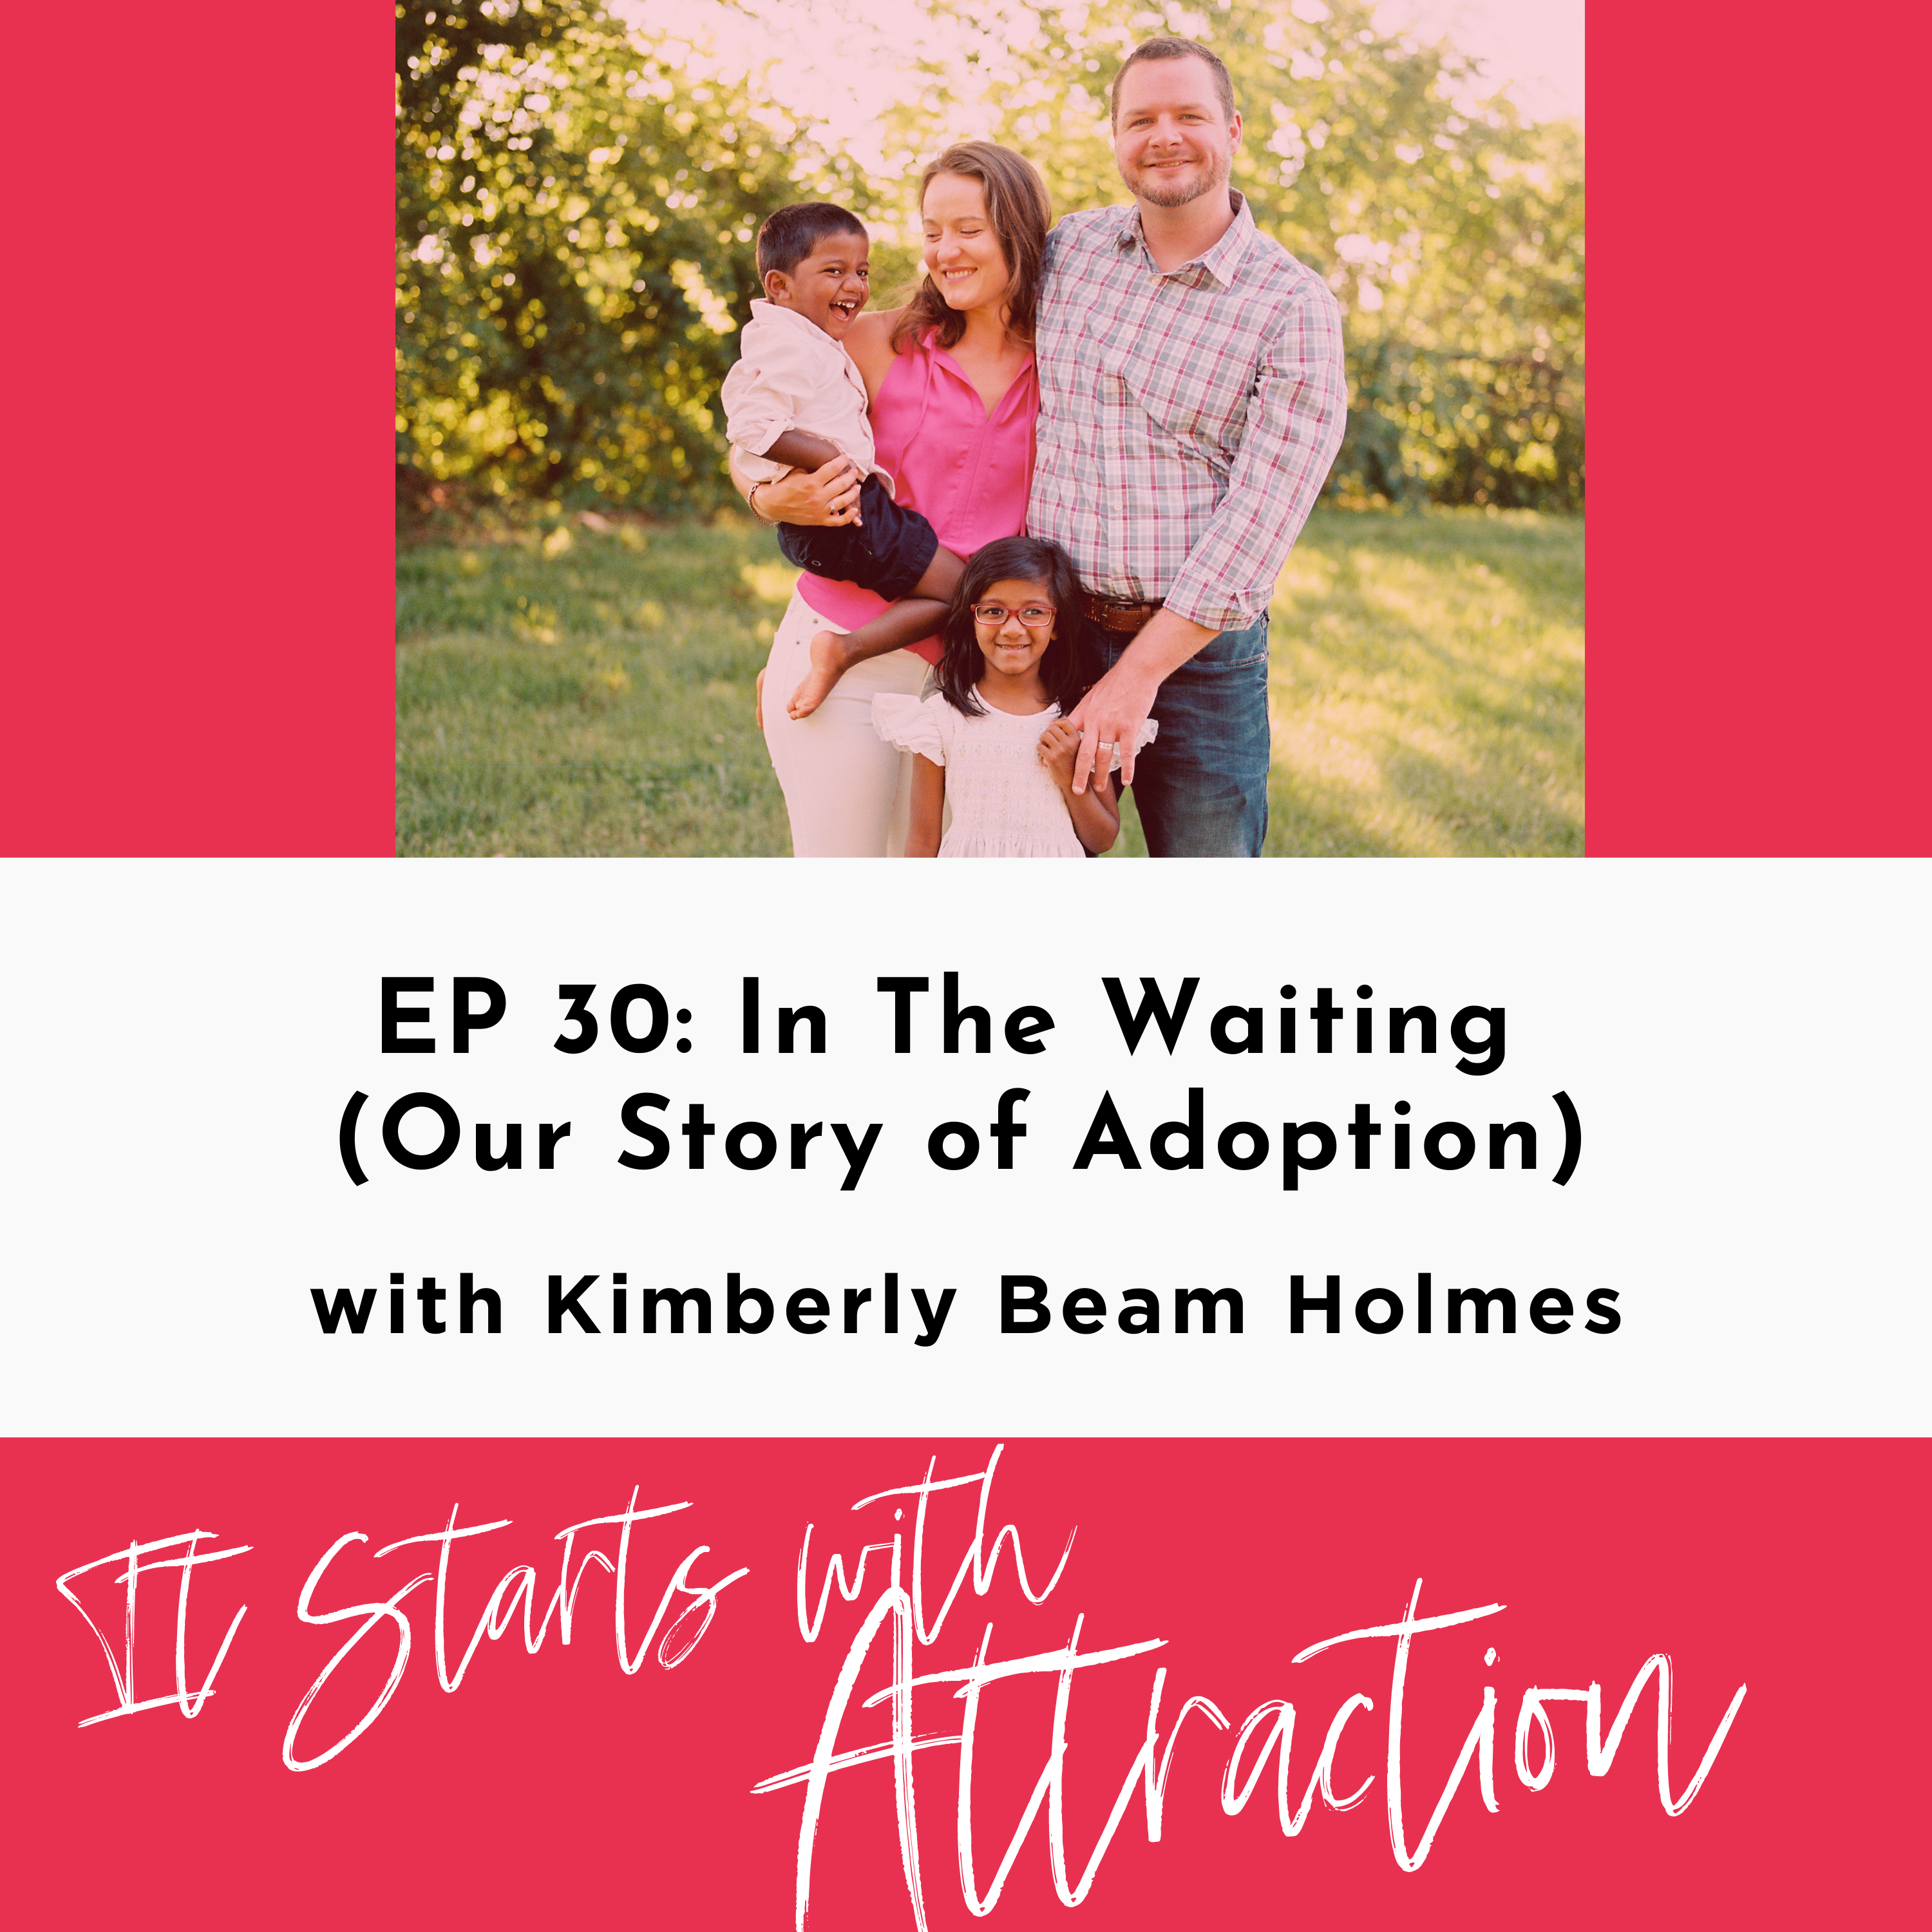 In the Waiting. Adoption Story.